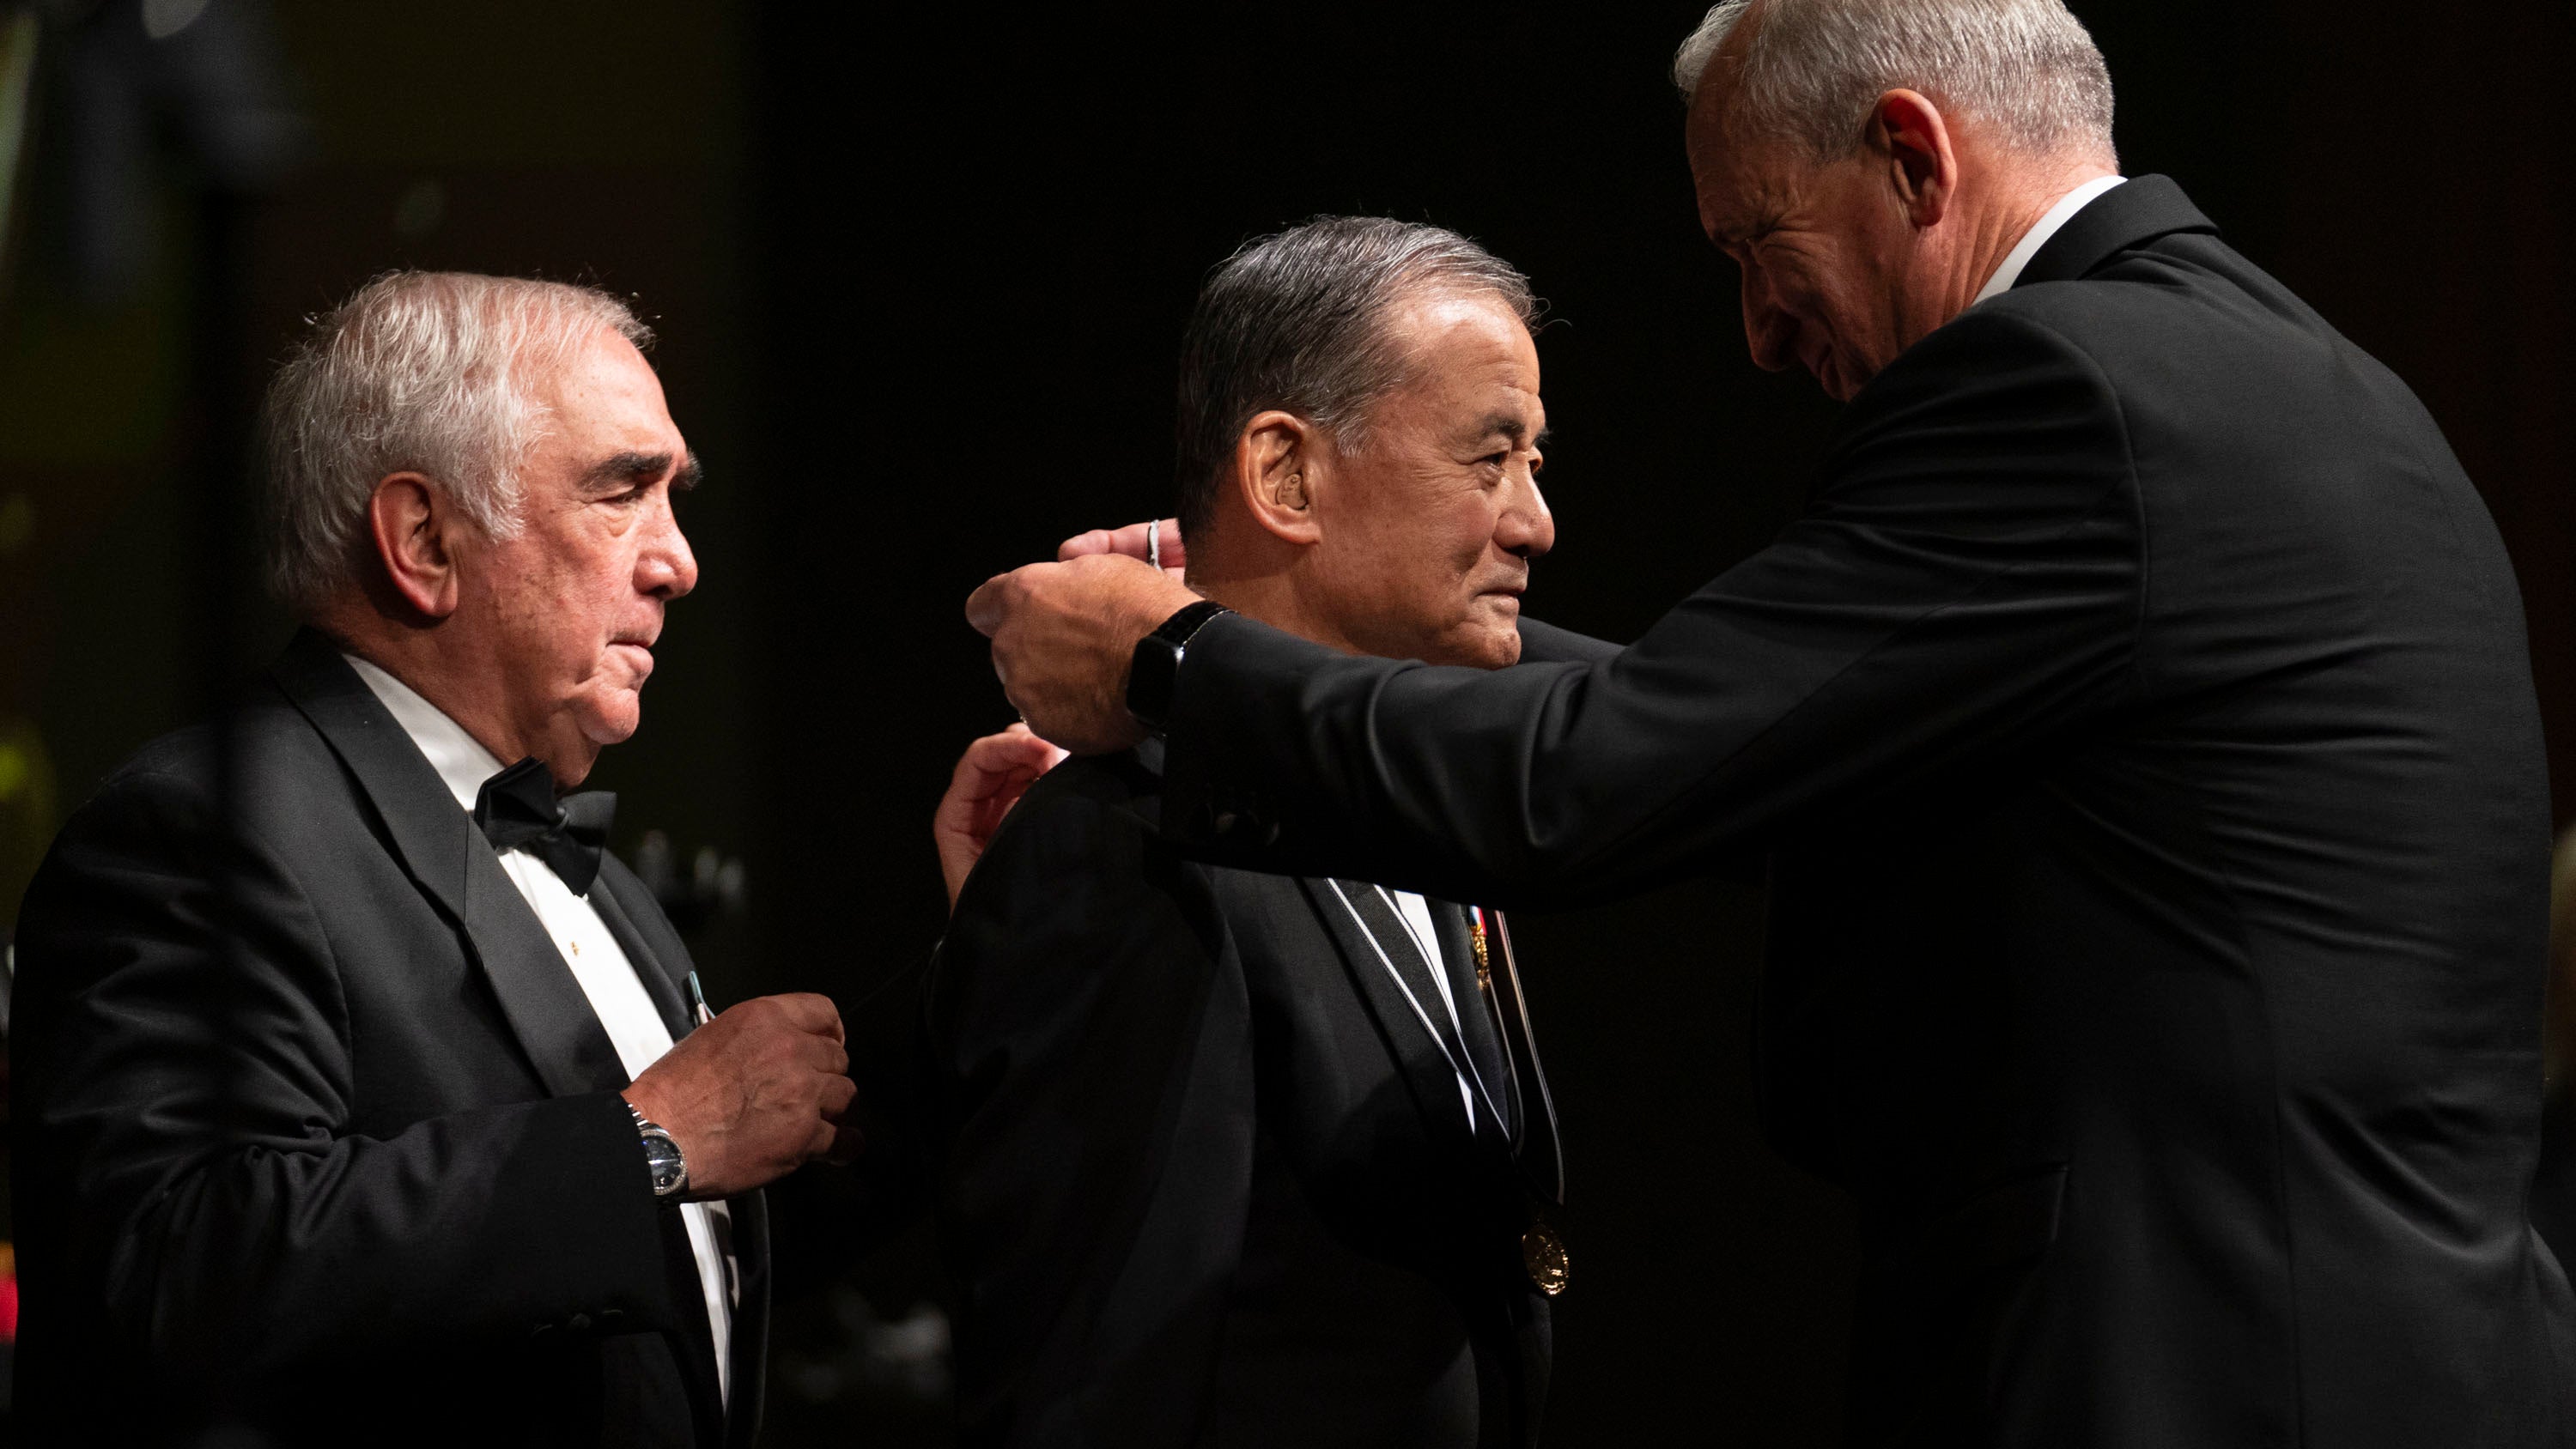 AUSA President and CEO Gen. Bob Brown, right, and Gen. John Tilelli, left, present Gen. Eric Shinseki with the George Catlett Marshall Medal at the AUSA 2023 Annual Meeting in Washington, D.C., Wednesday, Oct. 11, 2023. (Eric Lee for AUSA)